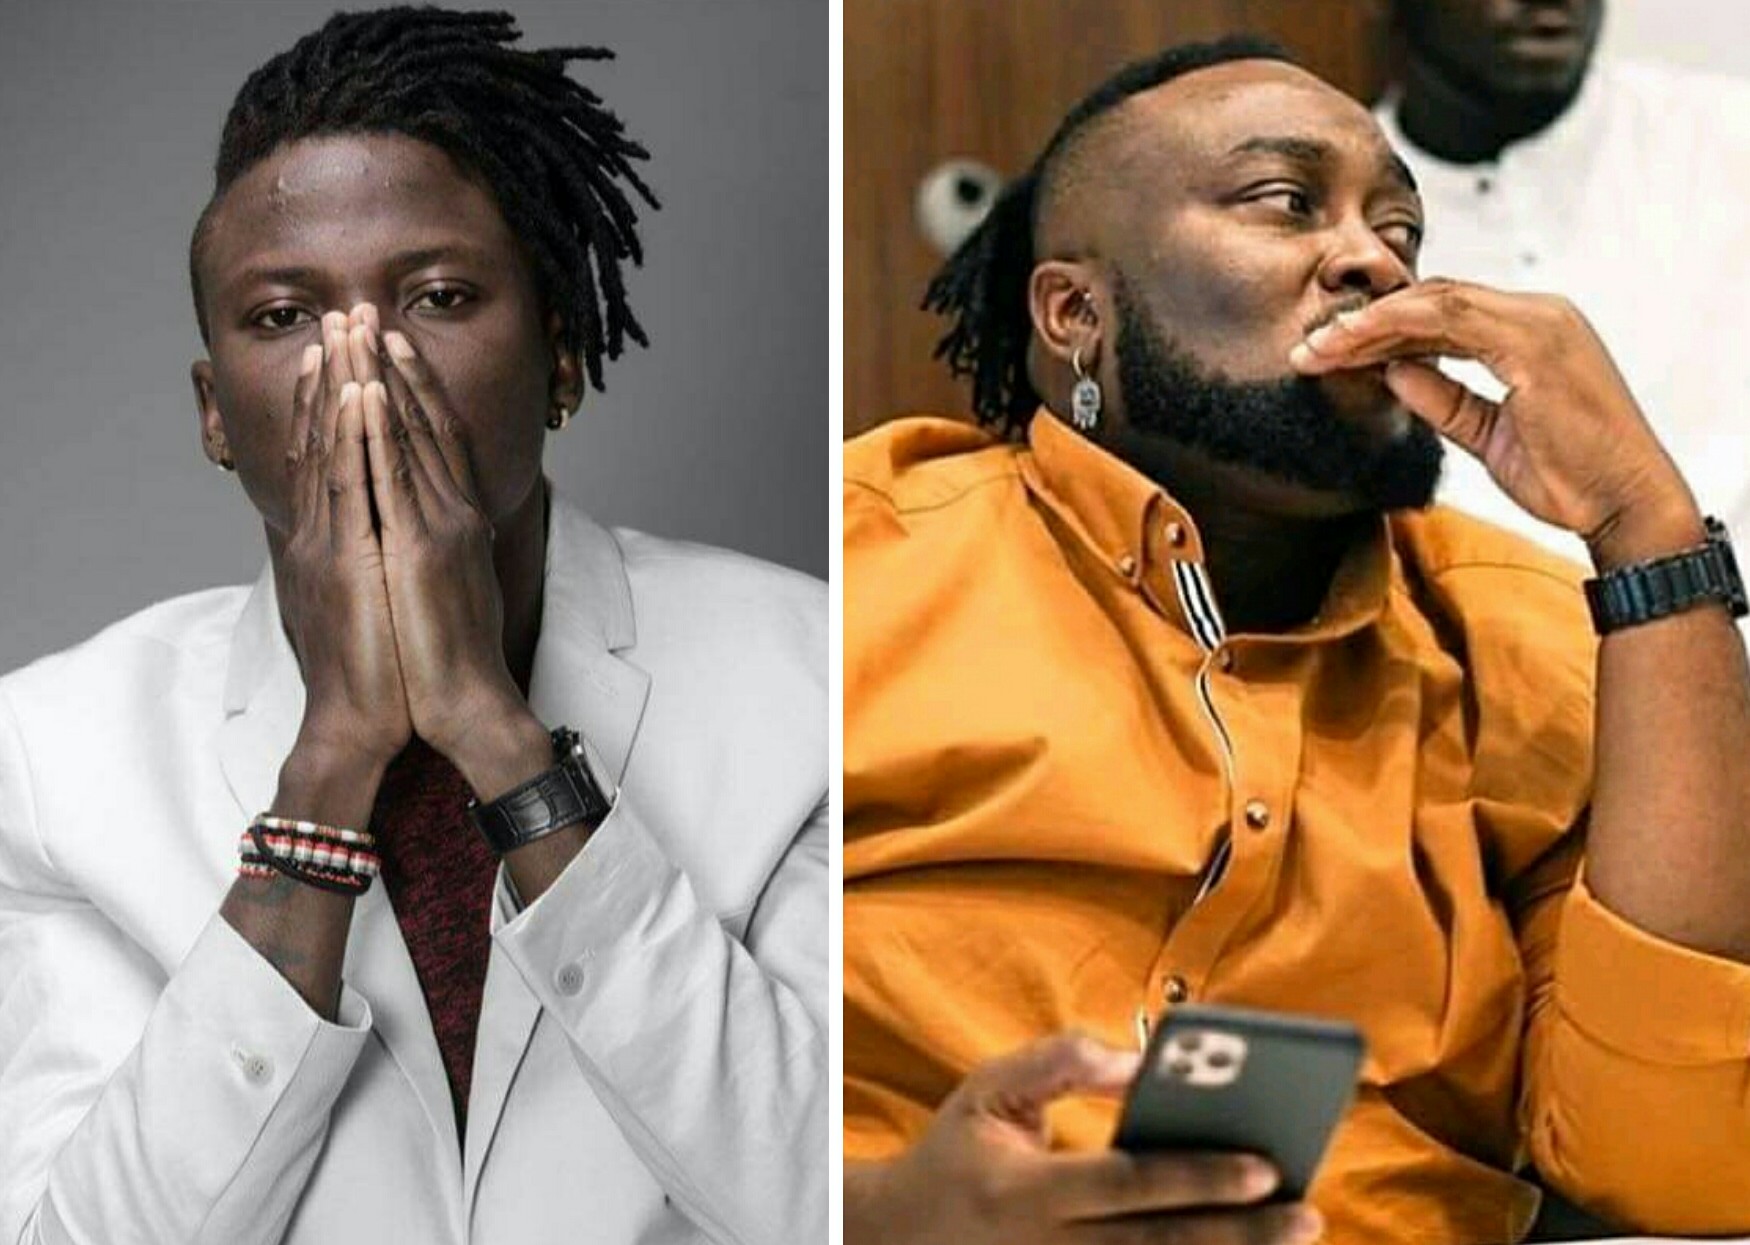 I asked Angel Town to forgive but he went ahead to file a police report – Stonebwoy breaks silence (WATCH)